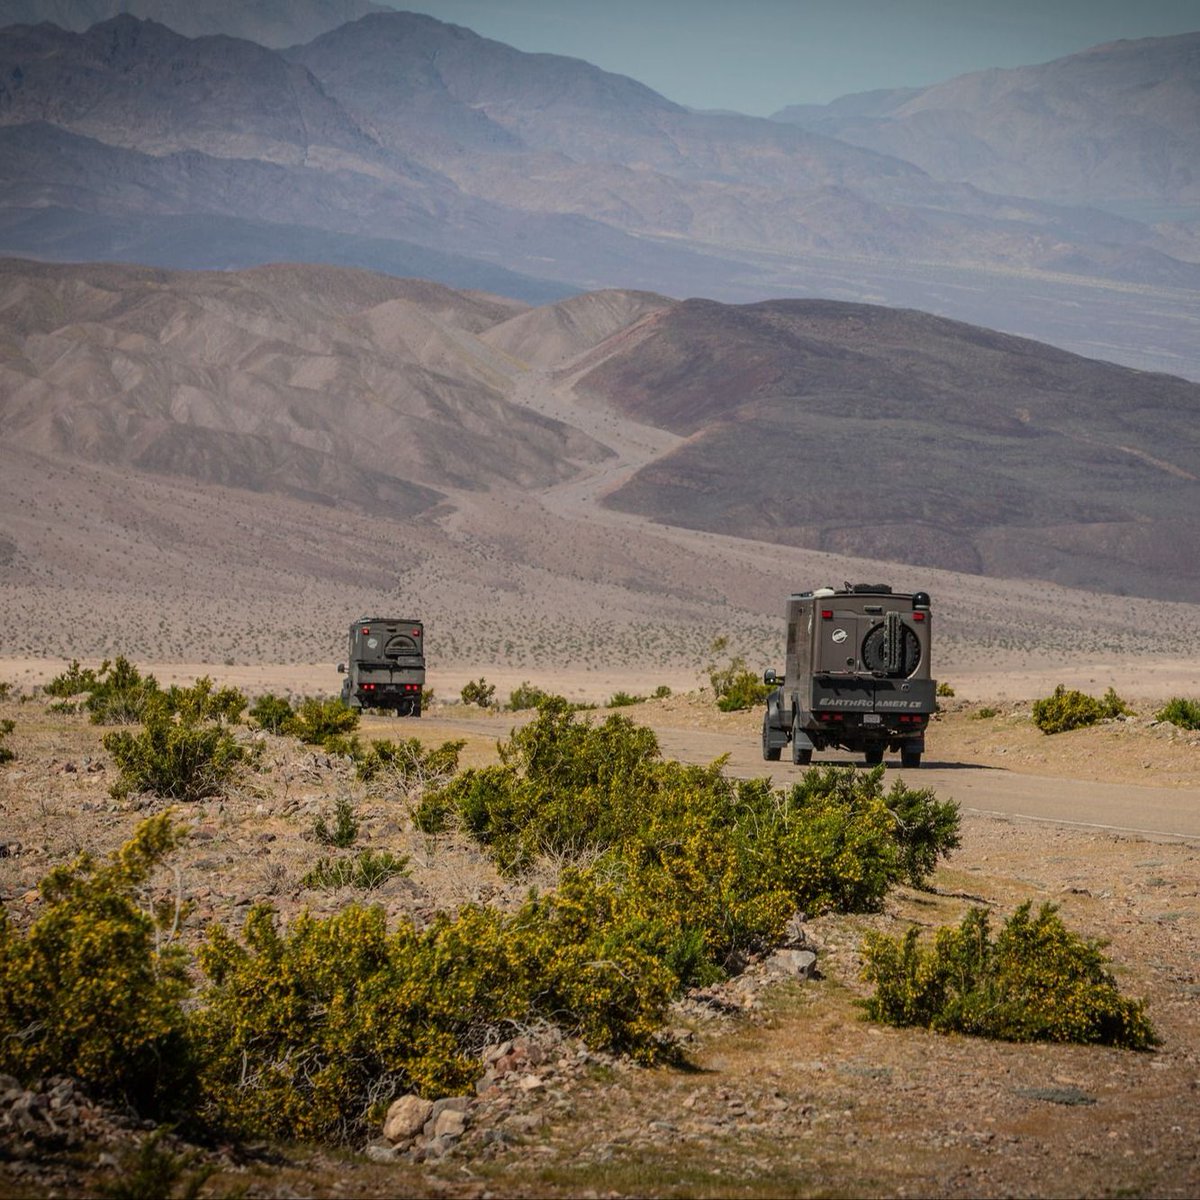 Adventures are always better with a buddy!
·
·
·

#earthroamer  #offroad4x4 #expeditionvehicle #campinglife #overlanding #4x4life #4x4trucks #vanlife #vanlifeadventures #luxuryvehicles